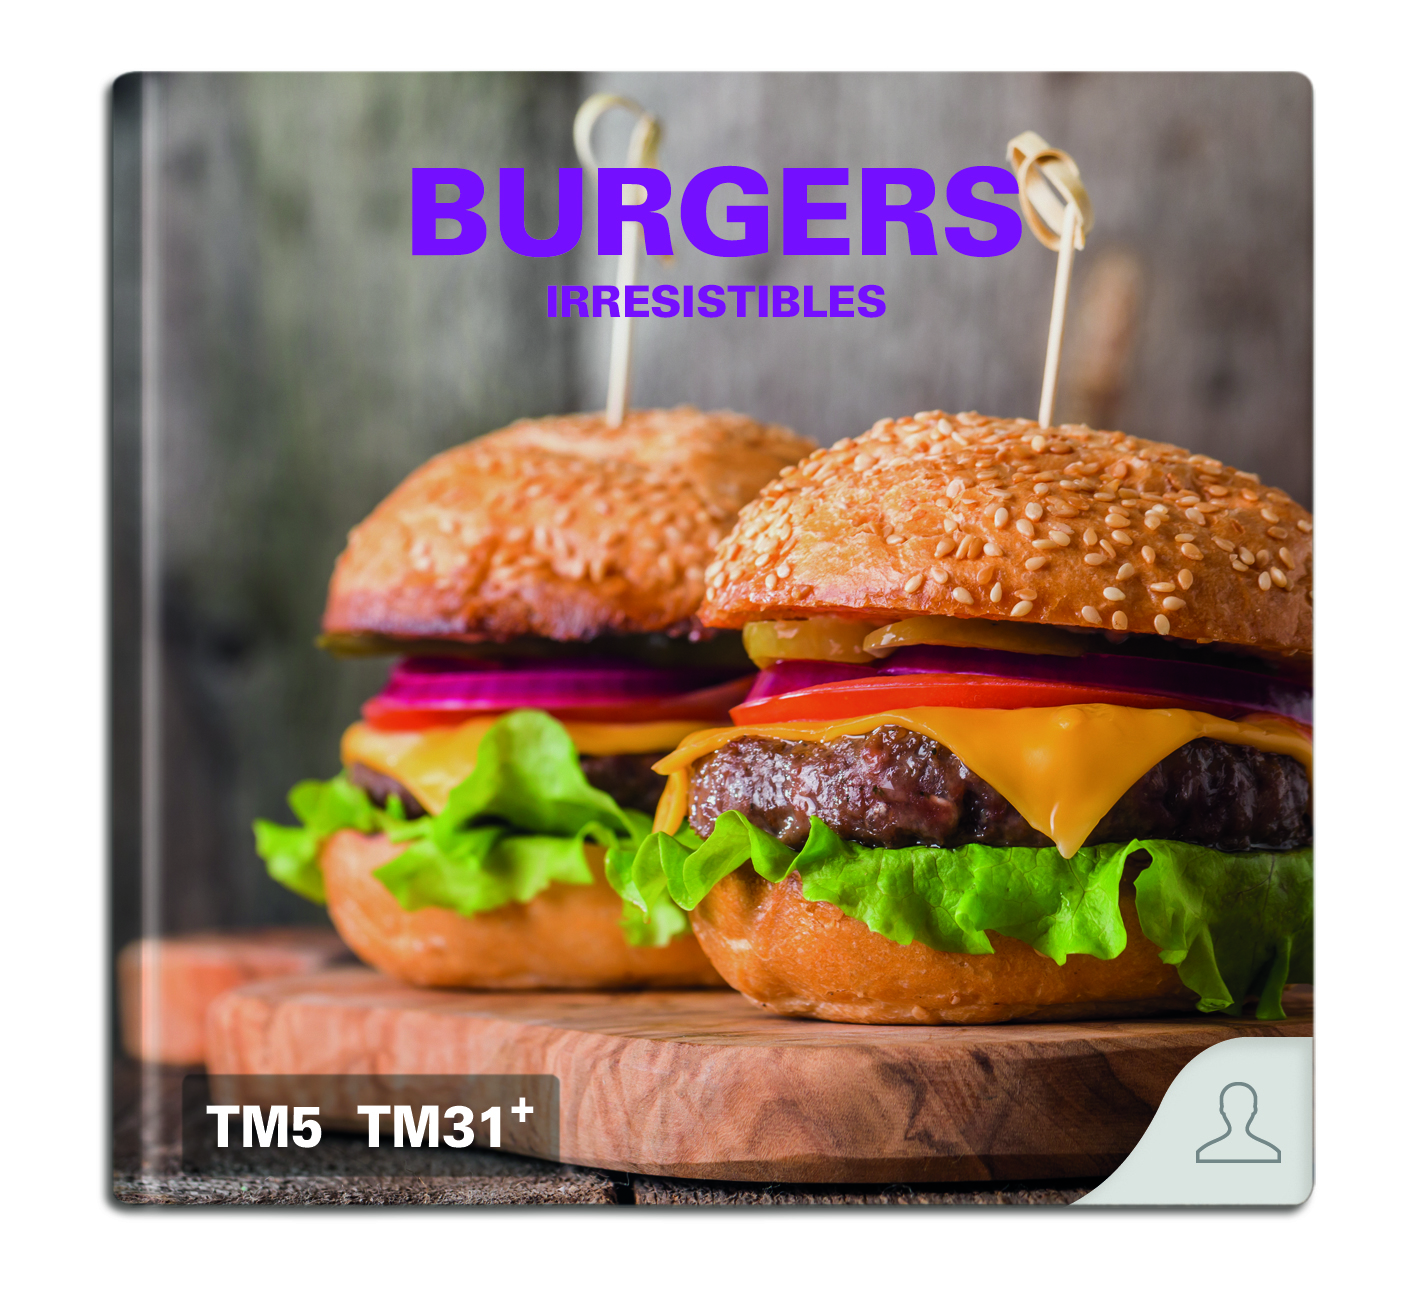 IRRESISTIBLES BURGERS CON THERMOMIX ®